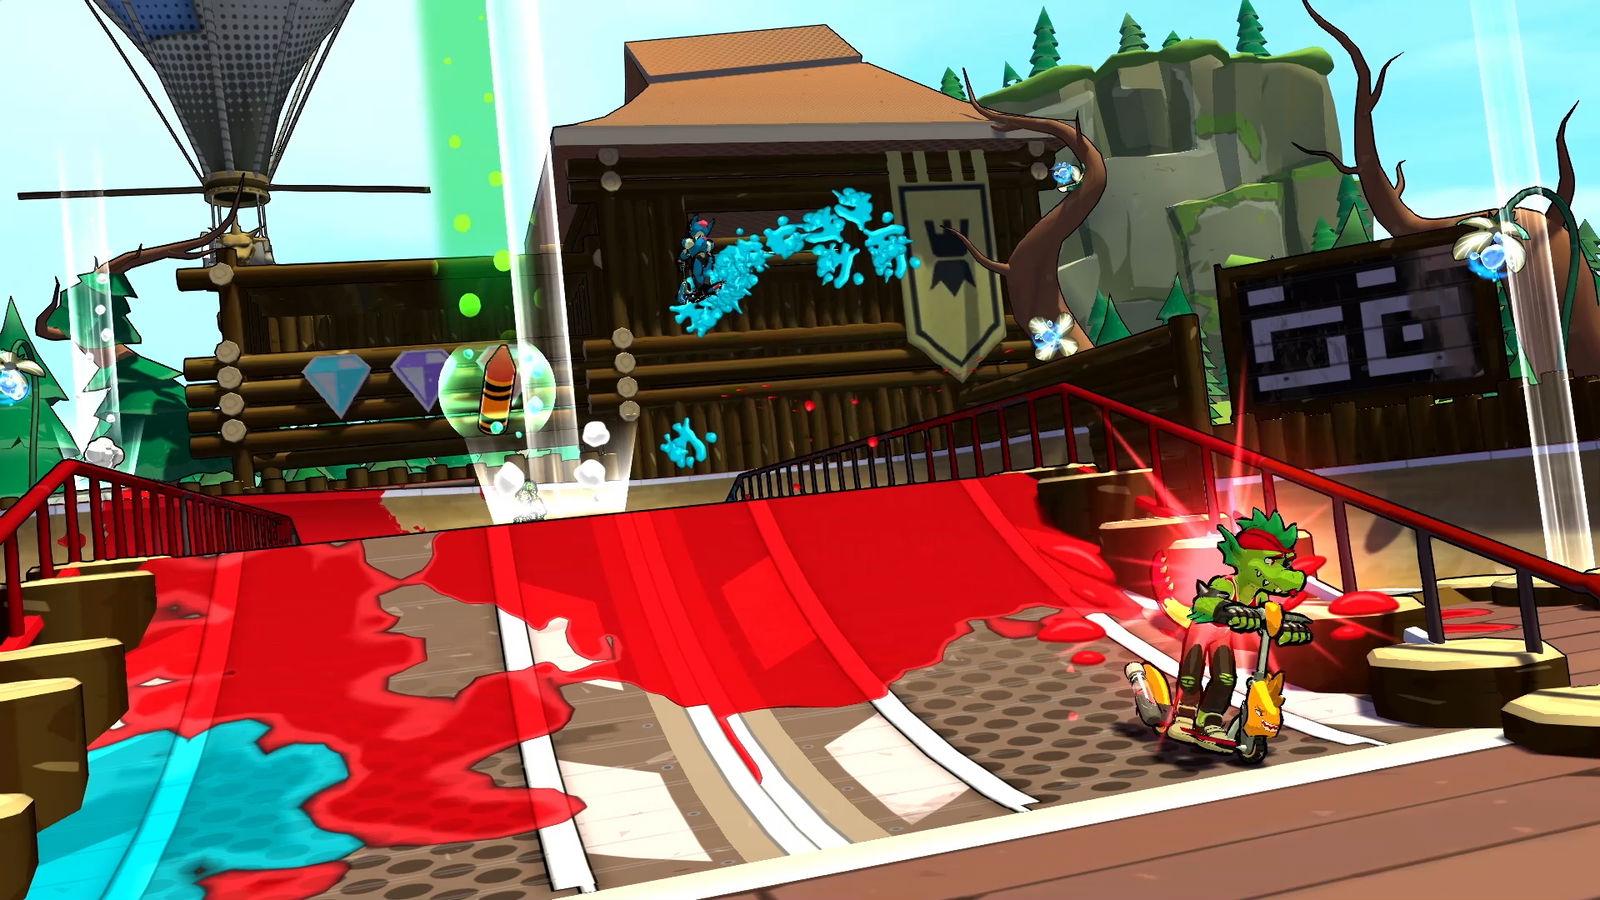 Crayola Scoot Will Arrive On October 26 On Pc, Ps4